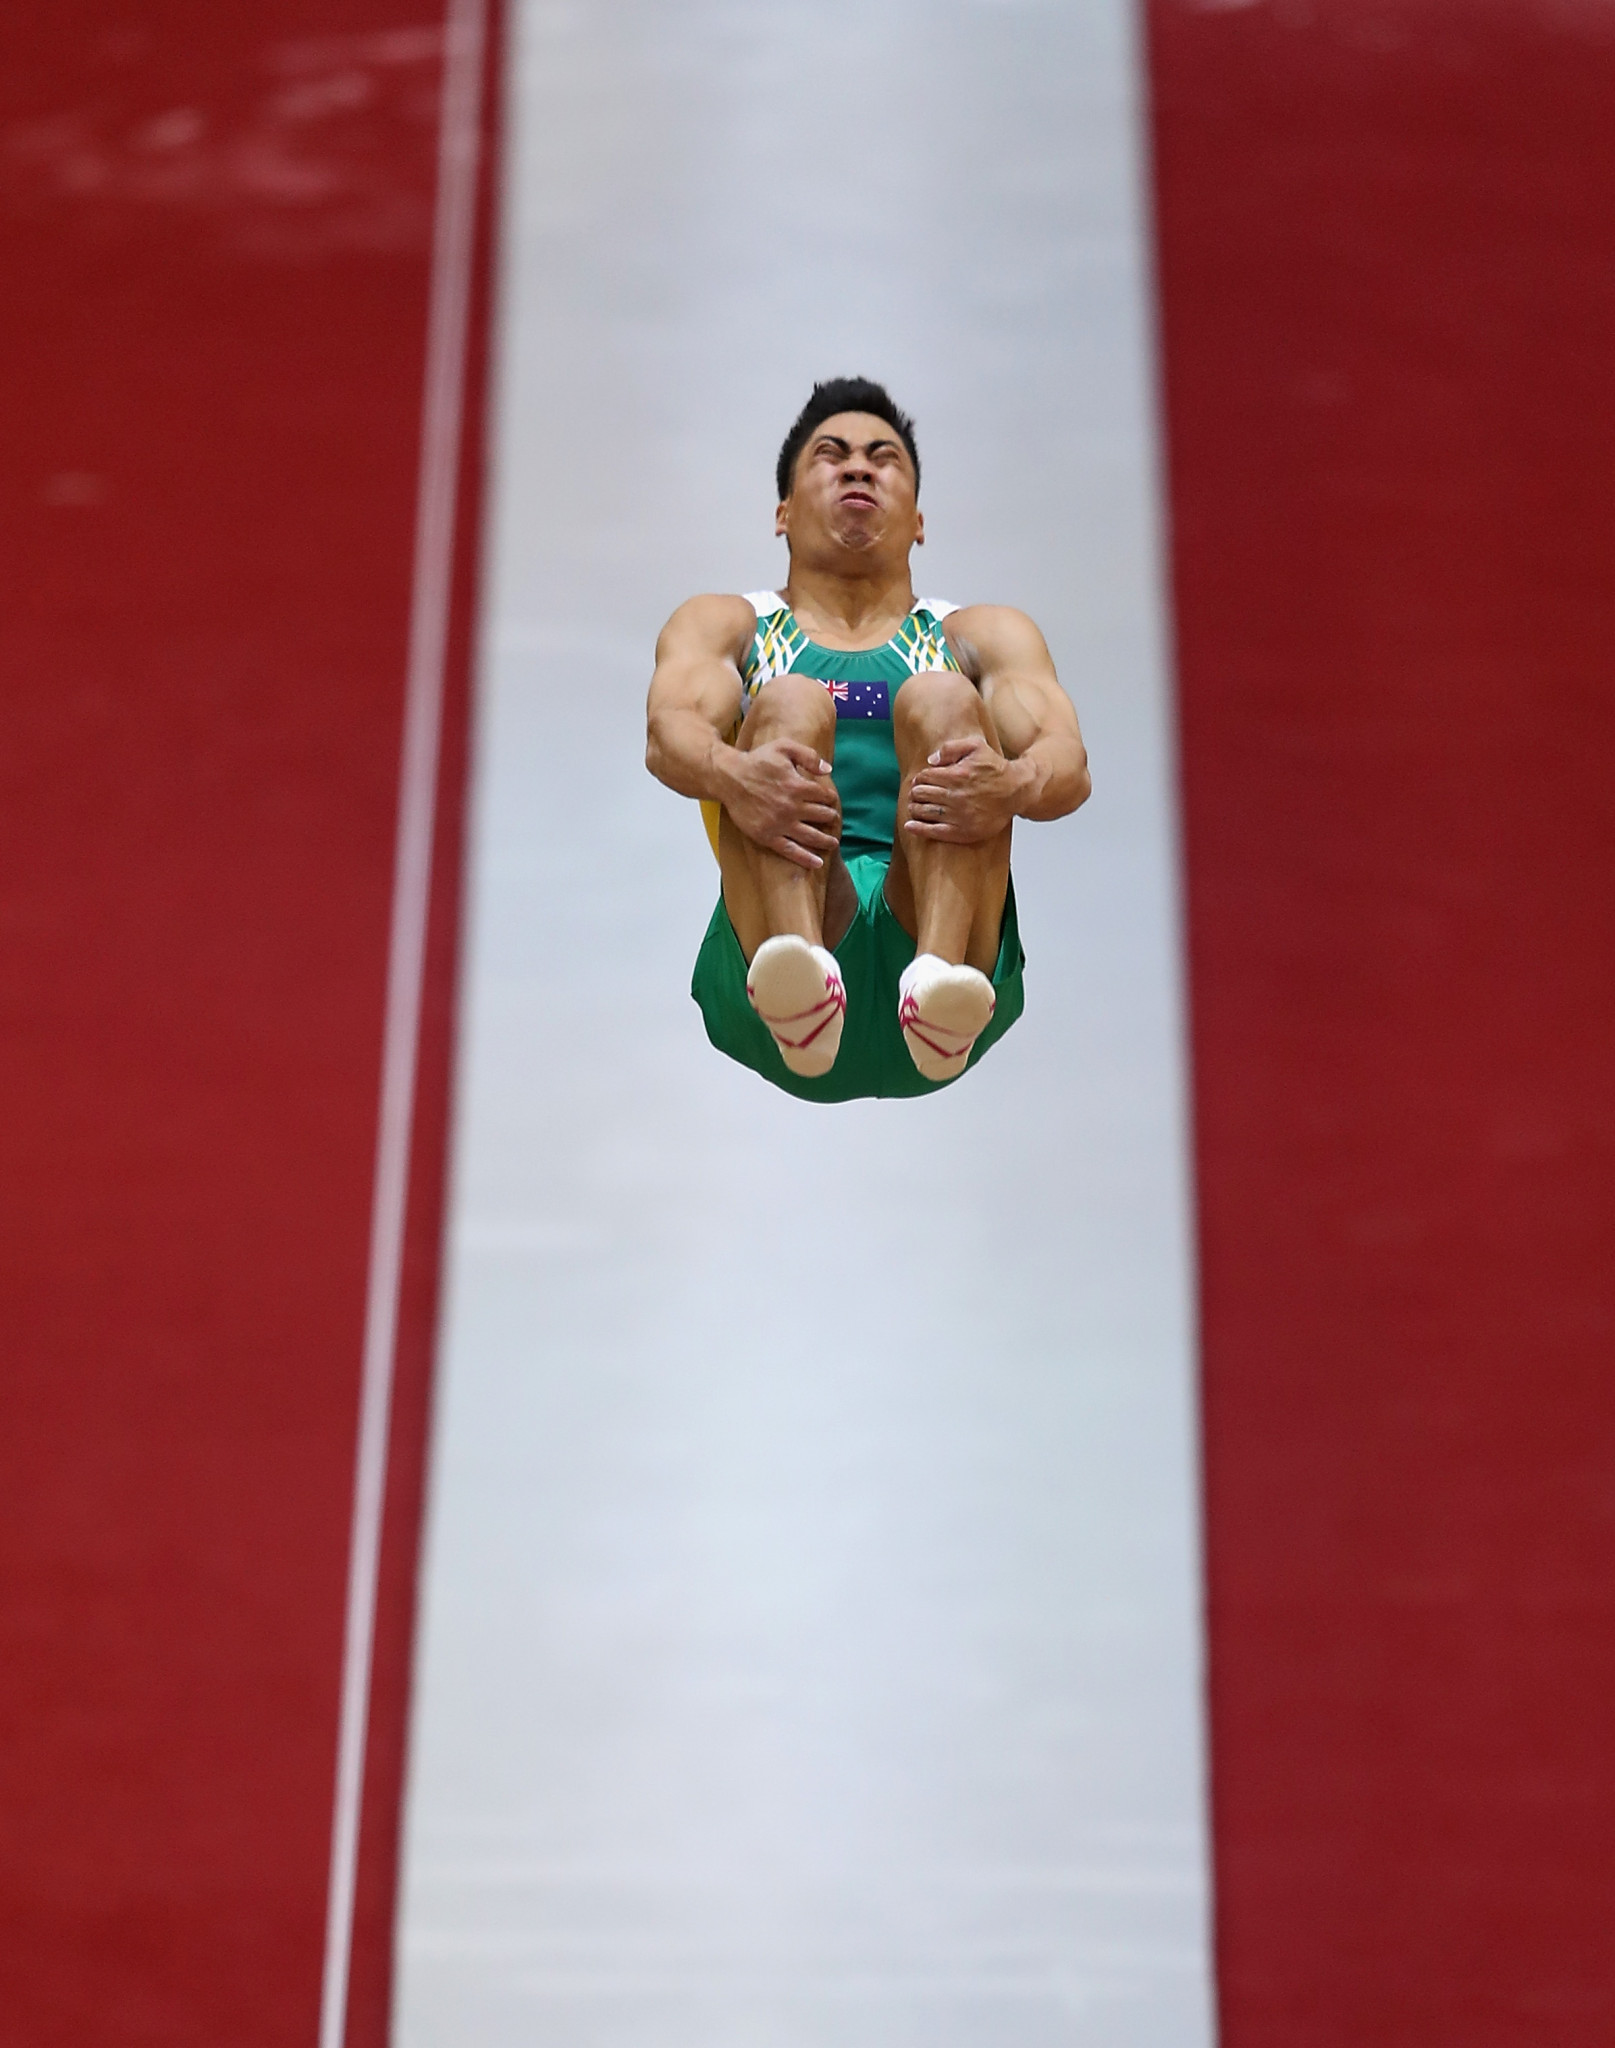 Australia's Christopher Remkes finished first in men's vault qualifying amid a high quality field ©Getty Images